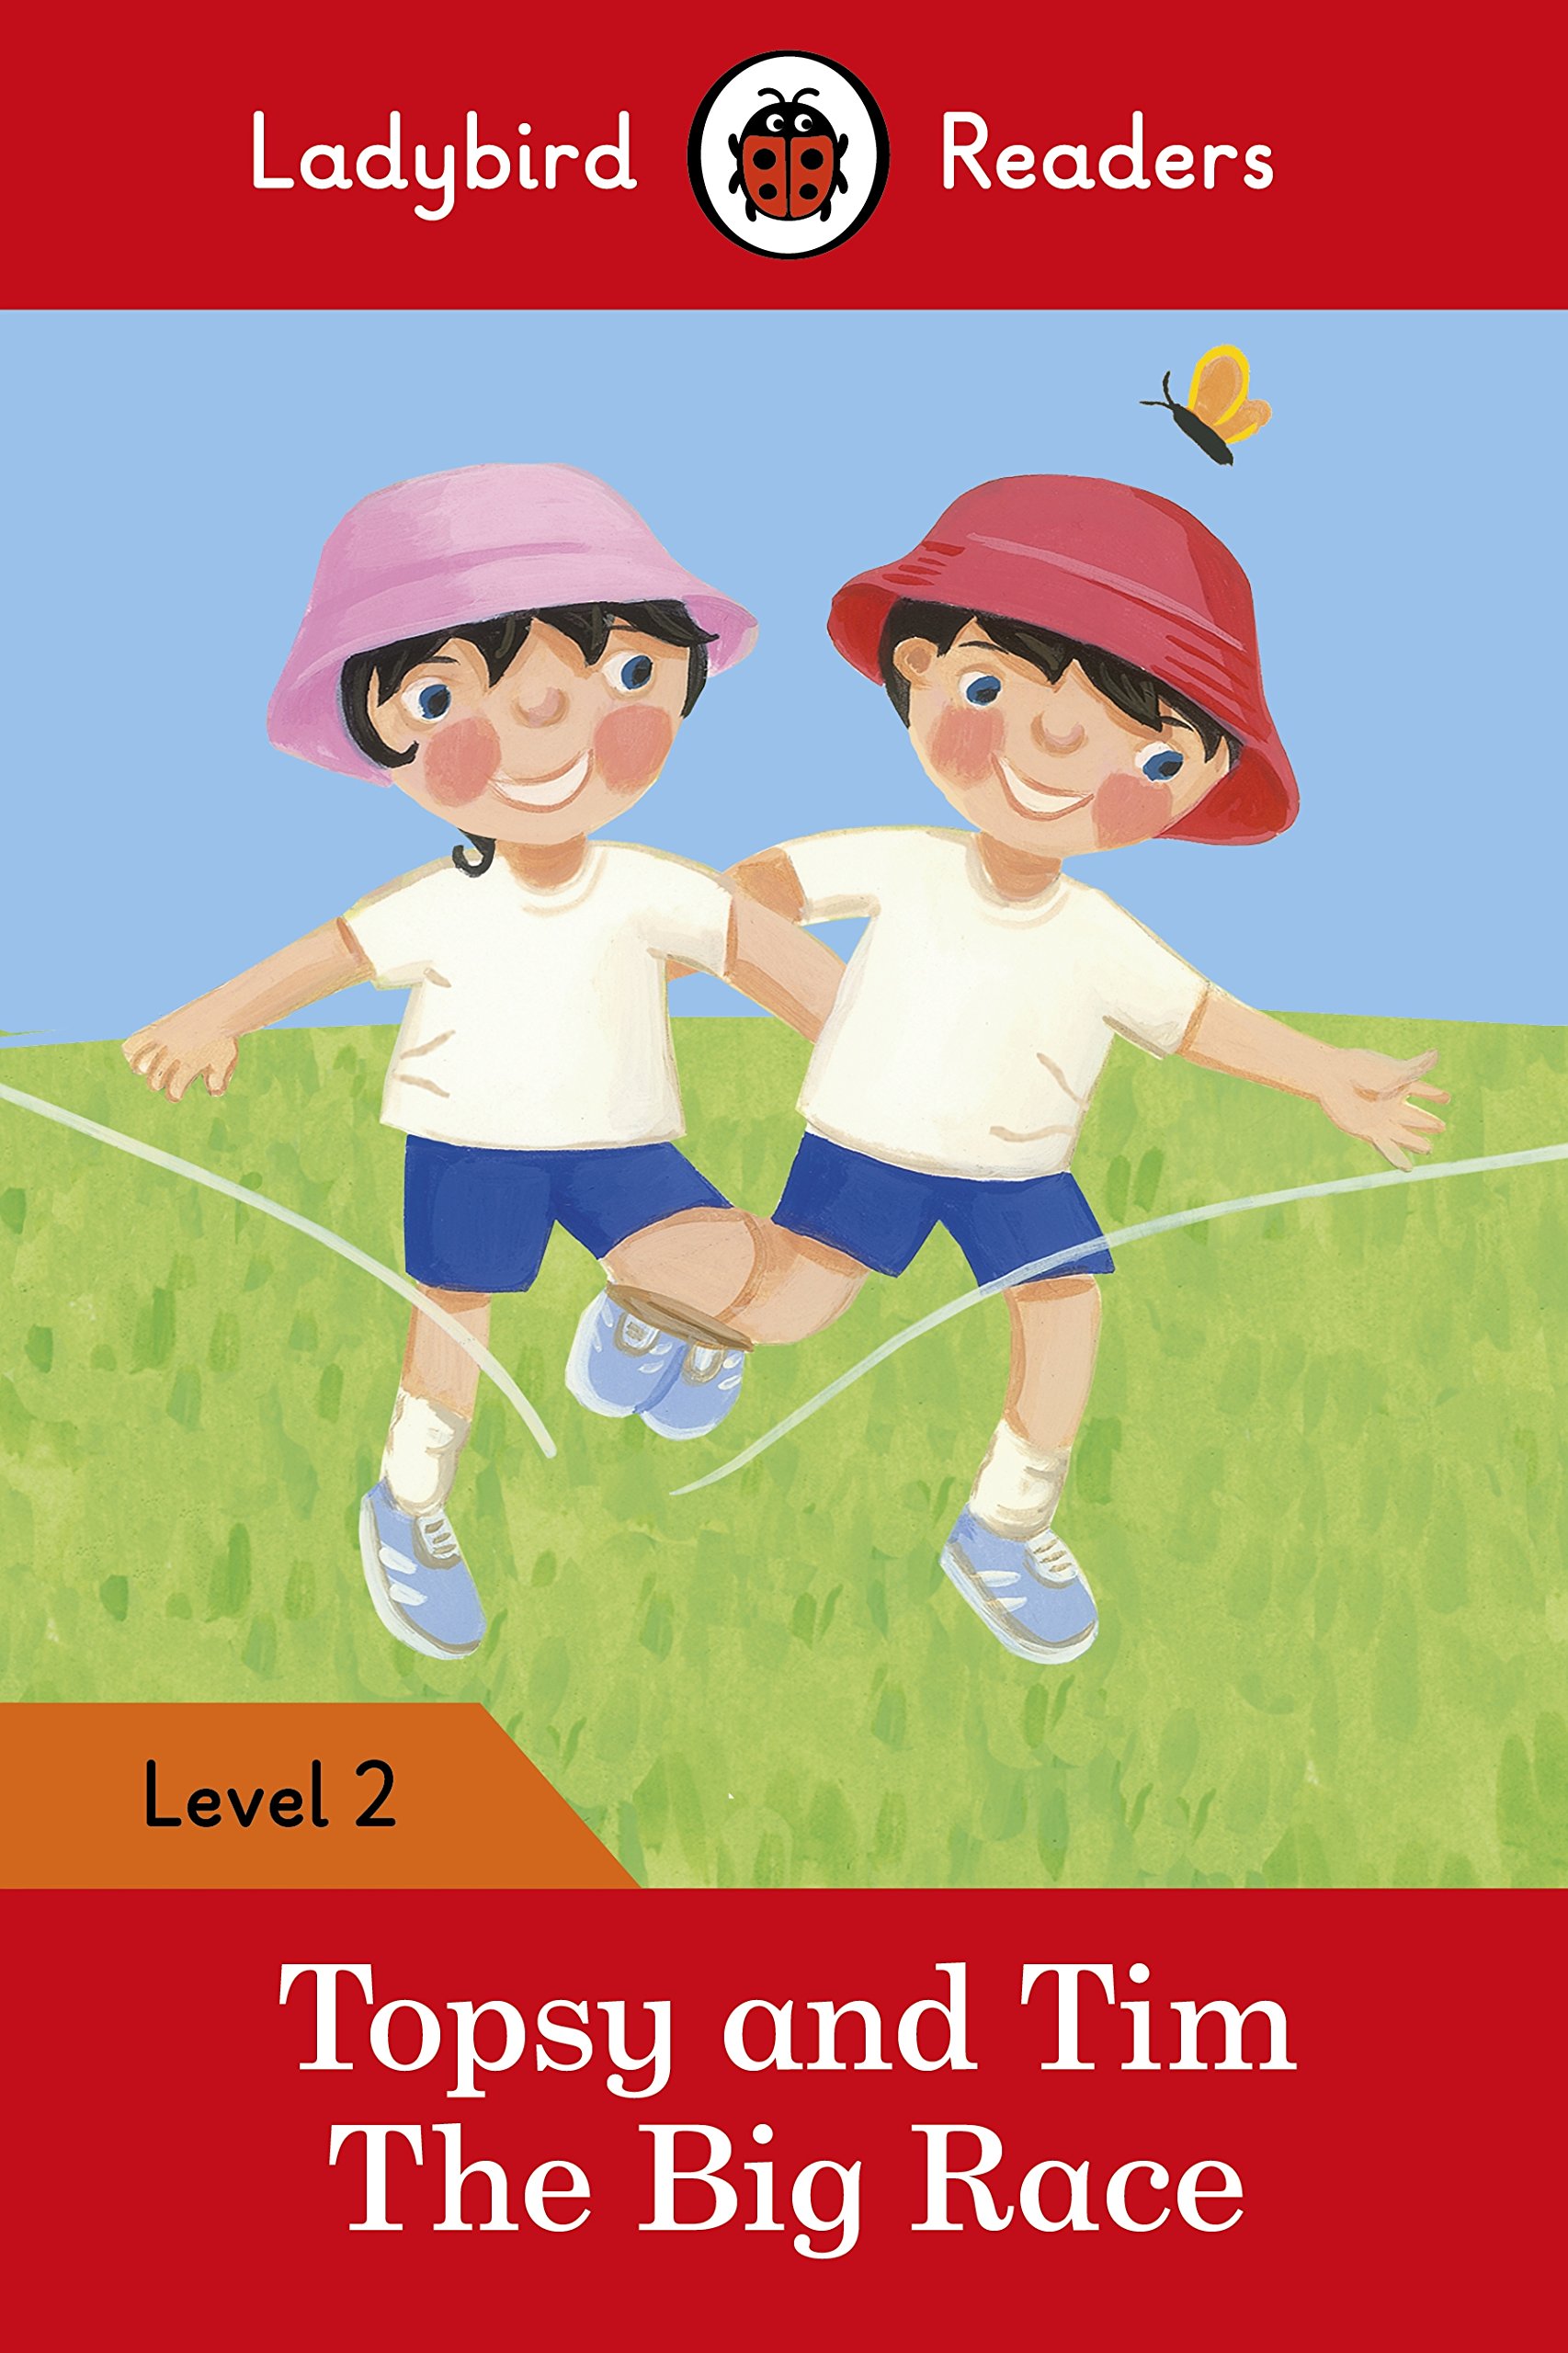 Ladybird Readers Level 2 : Topsy and Tim - The Big Race